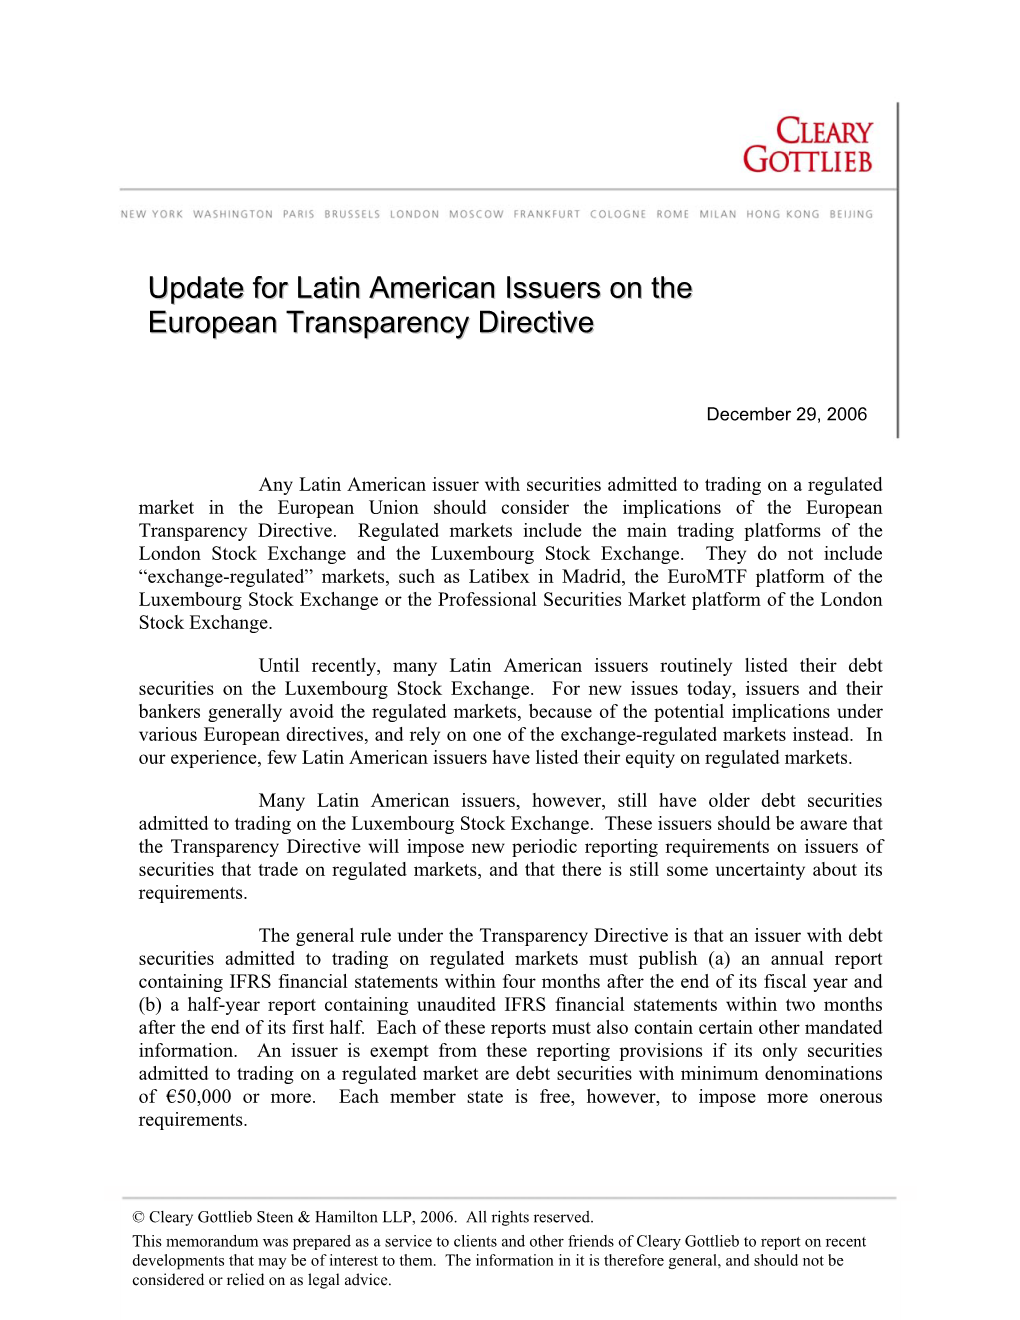 Update for Latin American Issuers on the European Transparency Directive